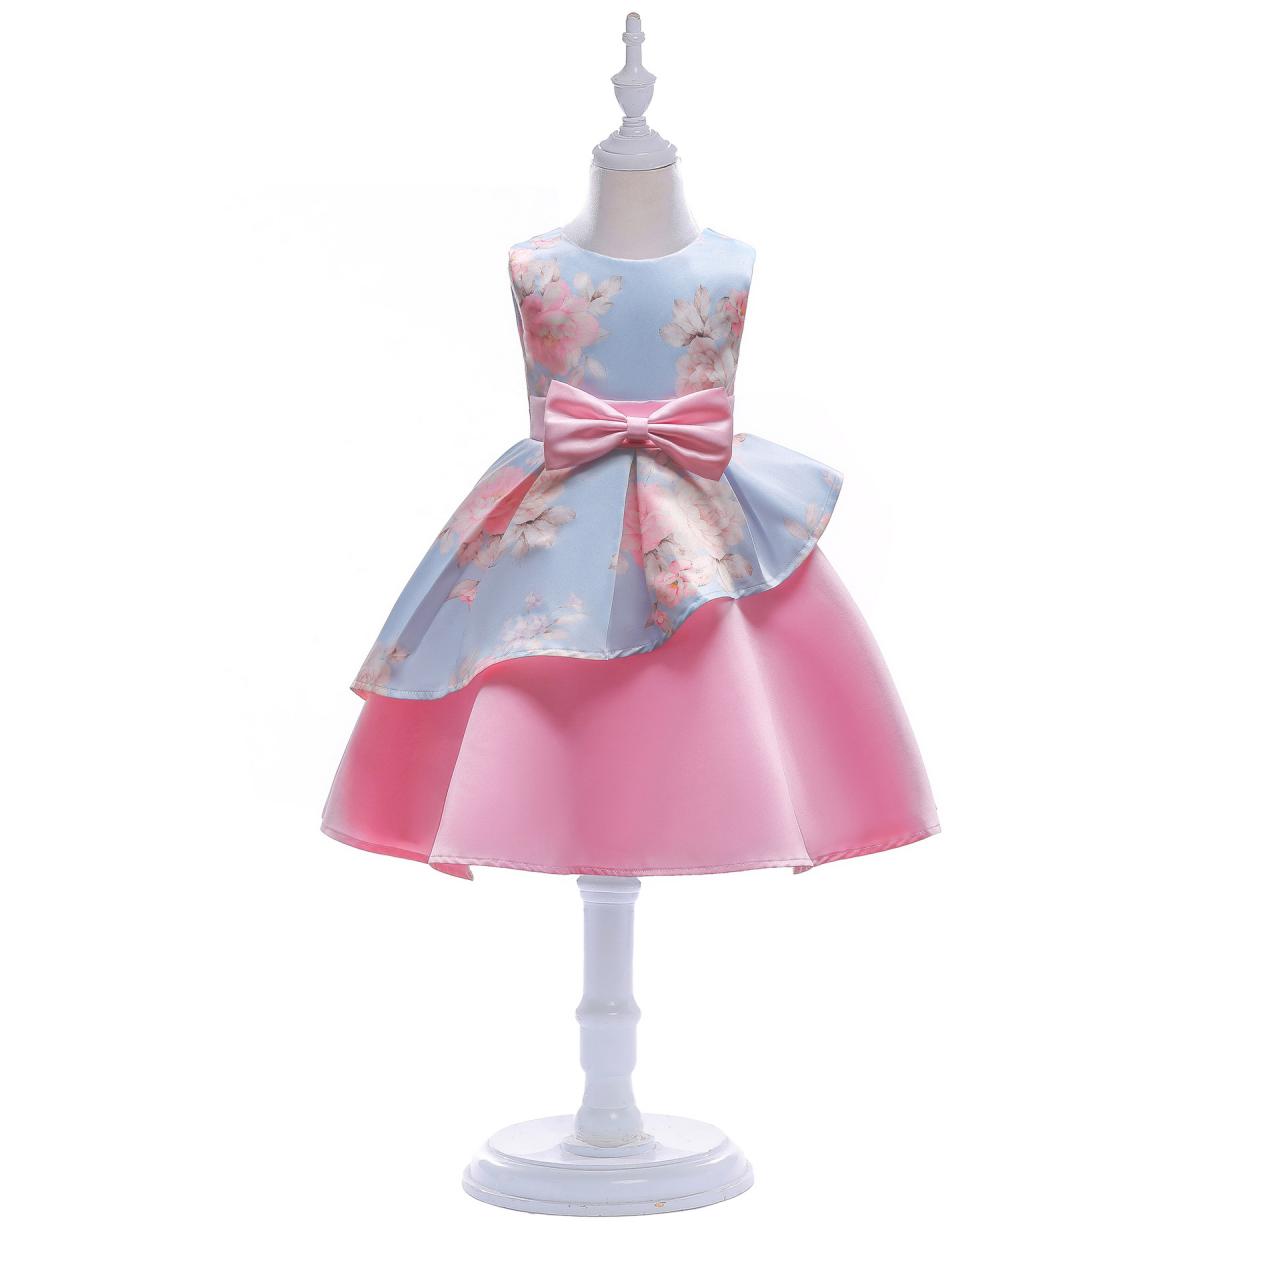 Cute O Neck Flower Girl Dresses With Bow For Weddings,first Communion Dresses For Girls